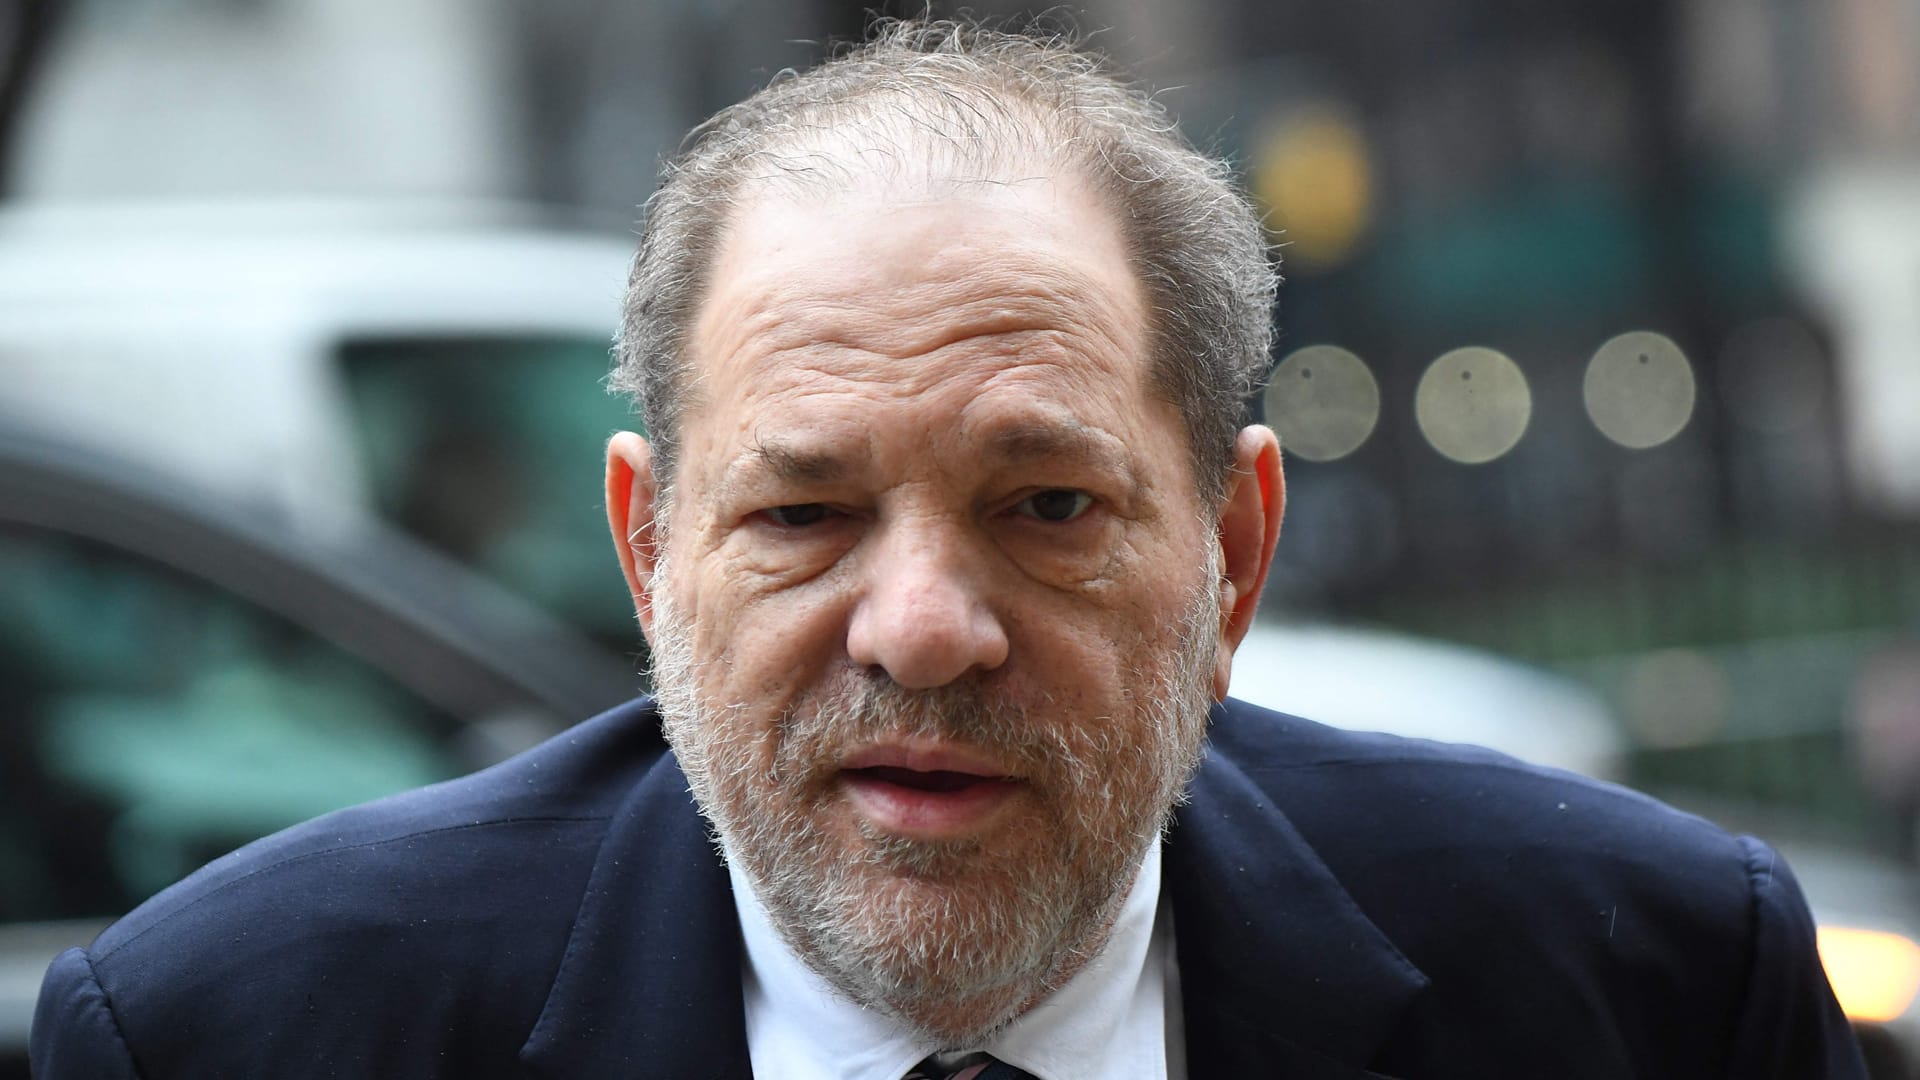 Harvey Weinstein's rape conviction overturned in bombshell 'Me Too' ruling as disgraced producer could face re-trial